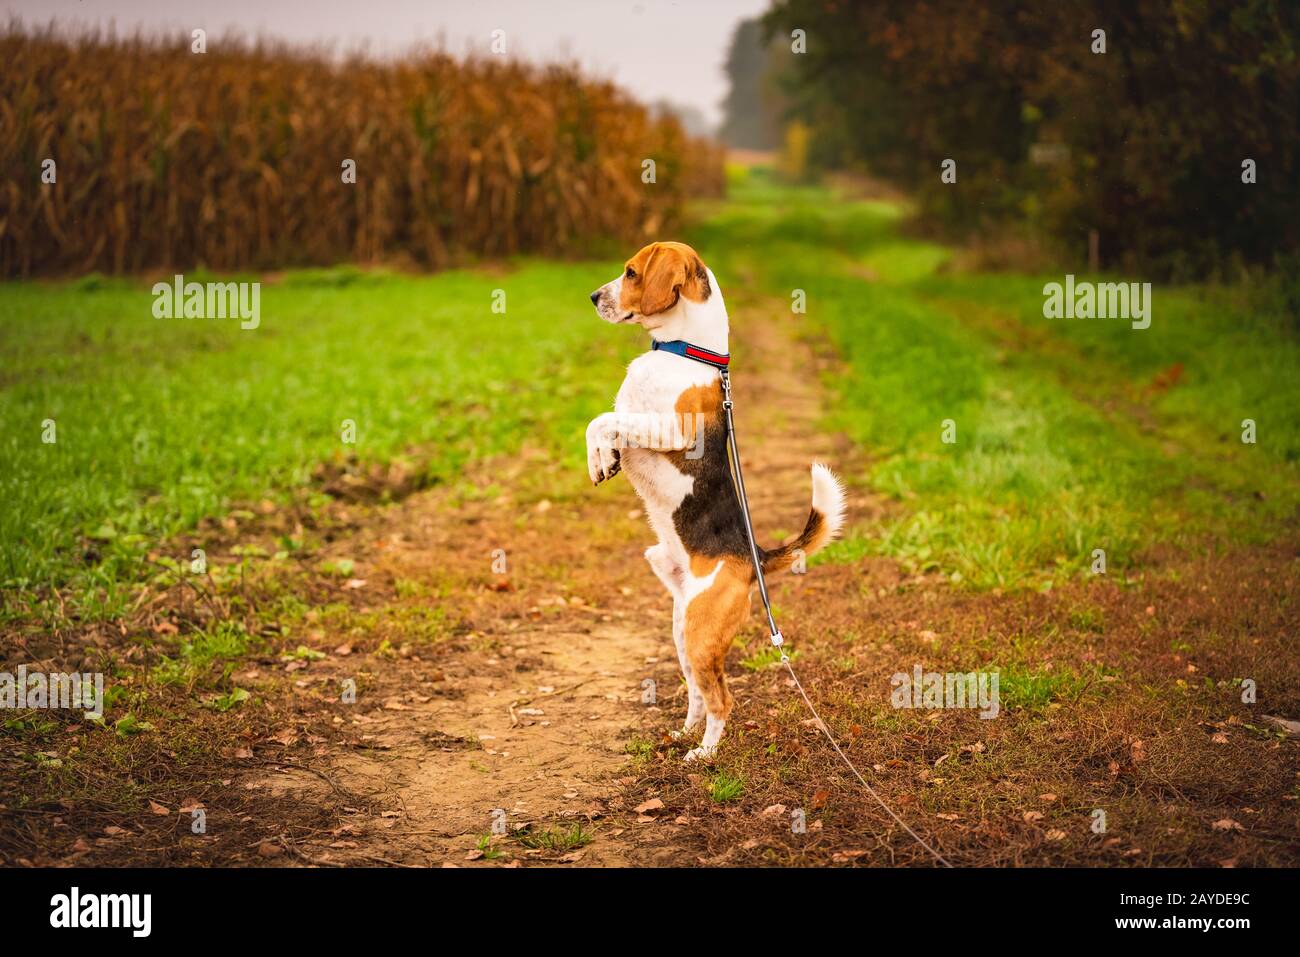 Funny beagle dog standing on two paws observing surroundings. Dog in rural environment Stock Photo